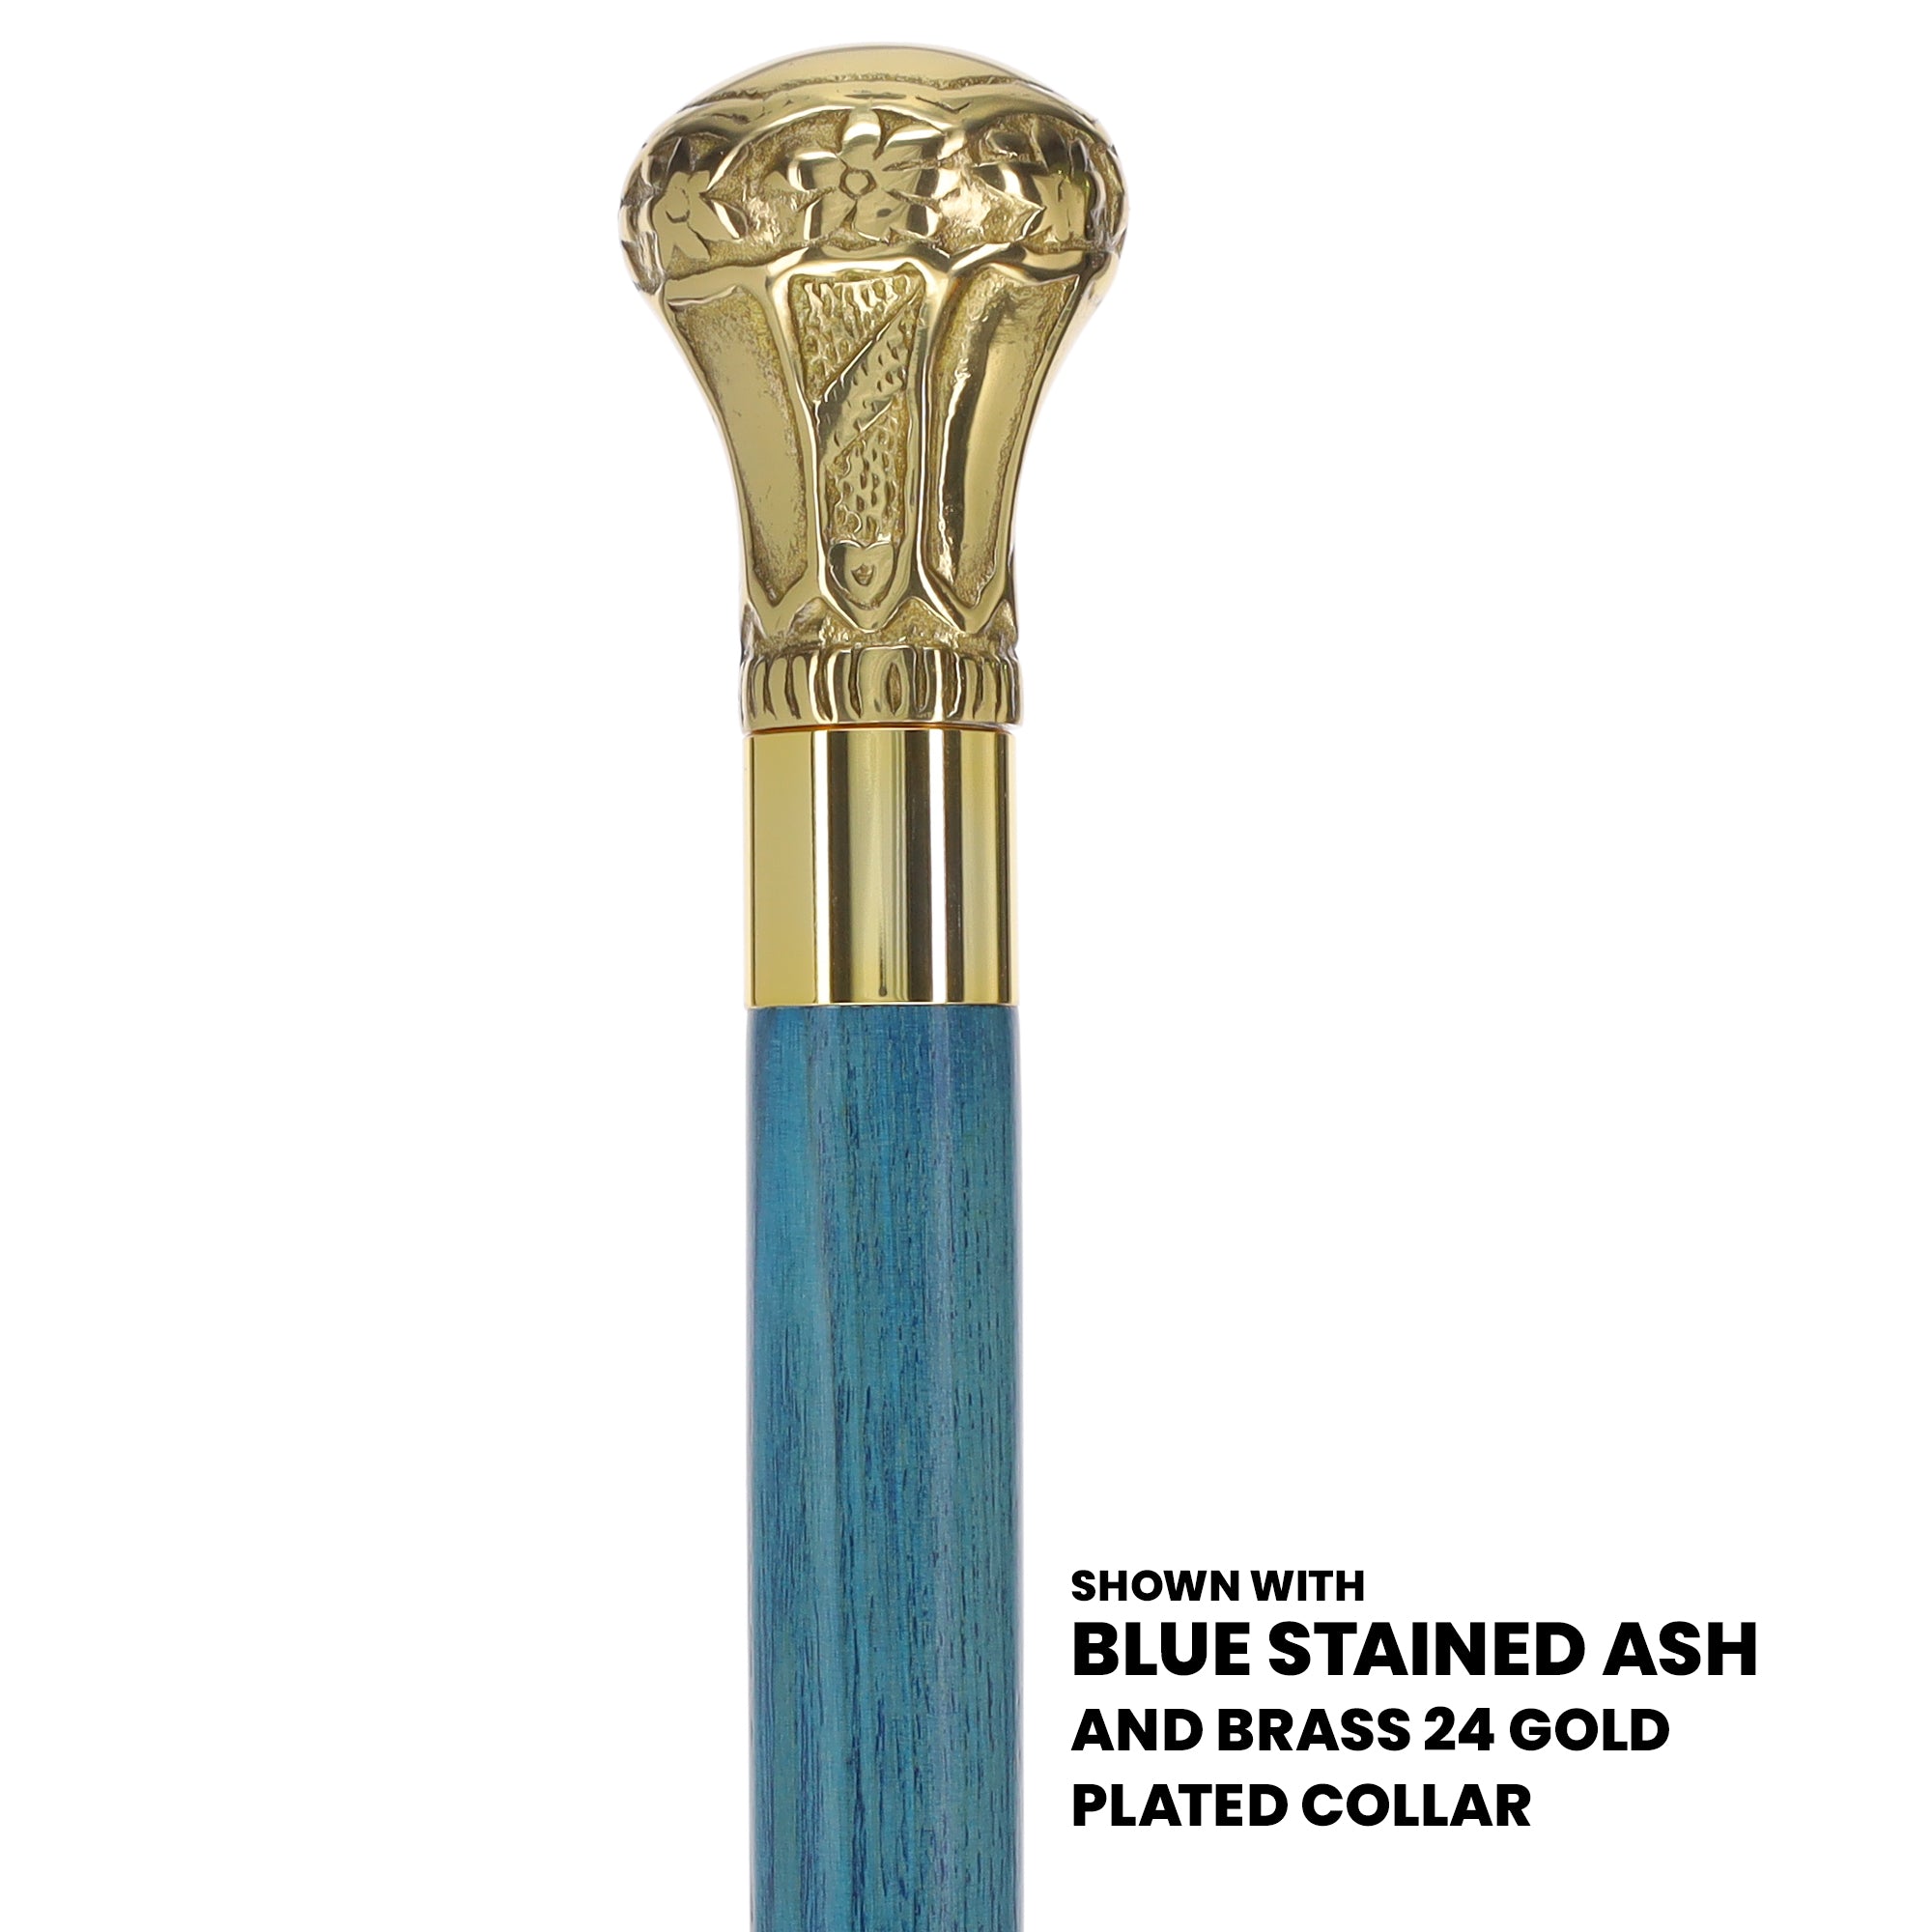 Brass Knob Handle Walking Cane w/ Custom Color Stained Ash Shaft –  Fashionable Canes